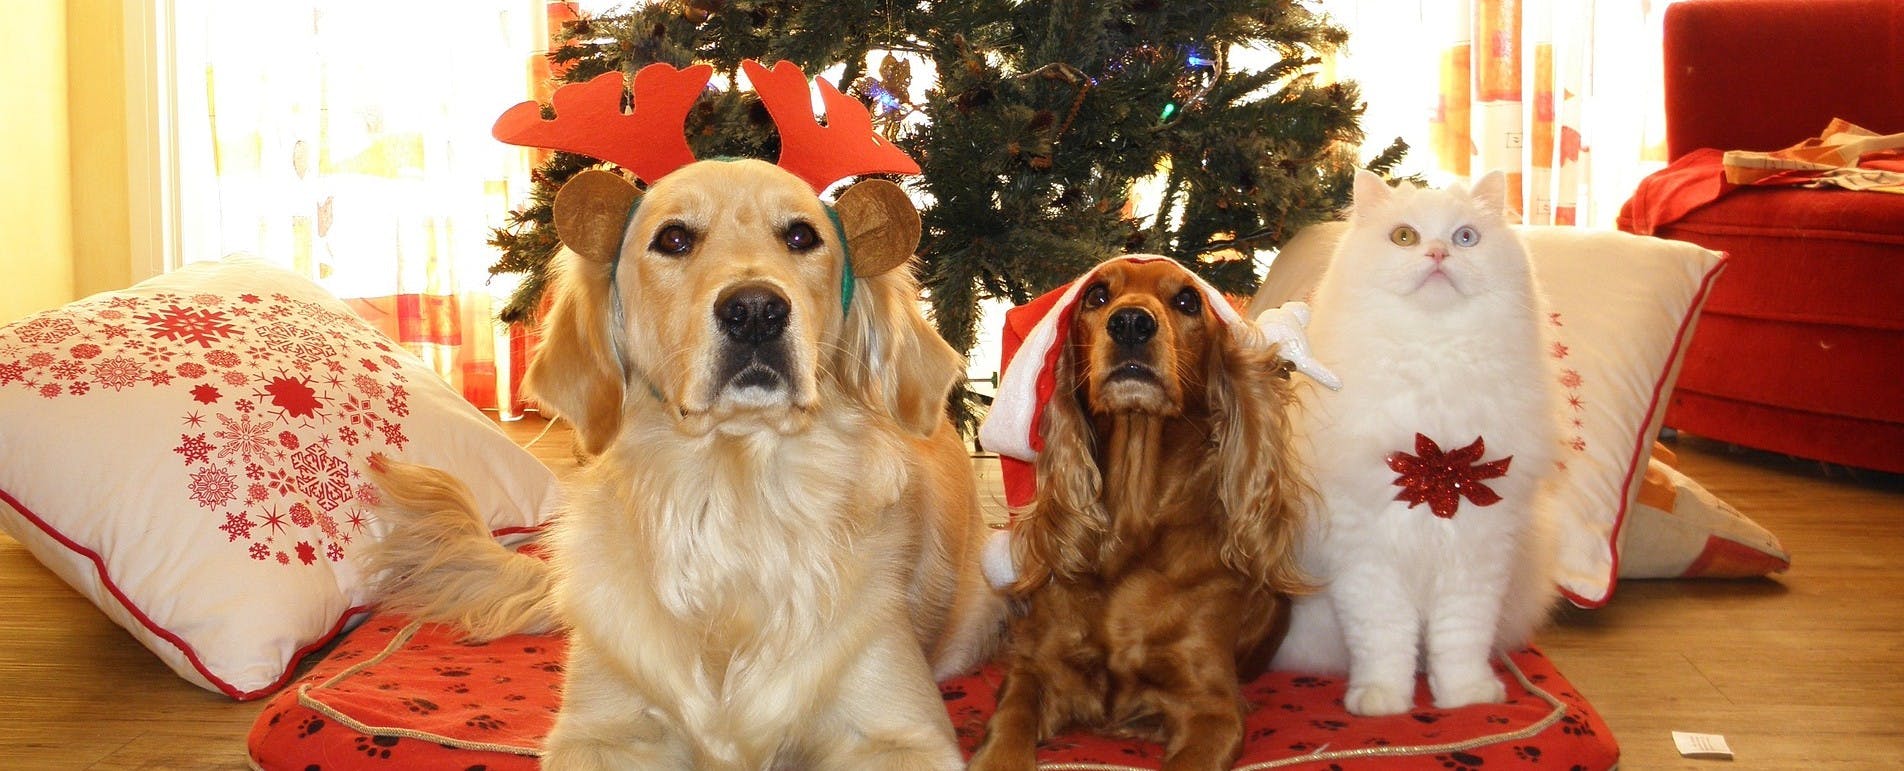 Winter Holiday Pet Safety Tips: Keeping Your Pets Safe and Cozy